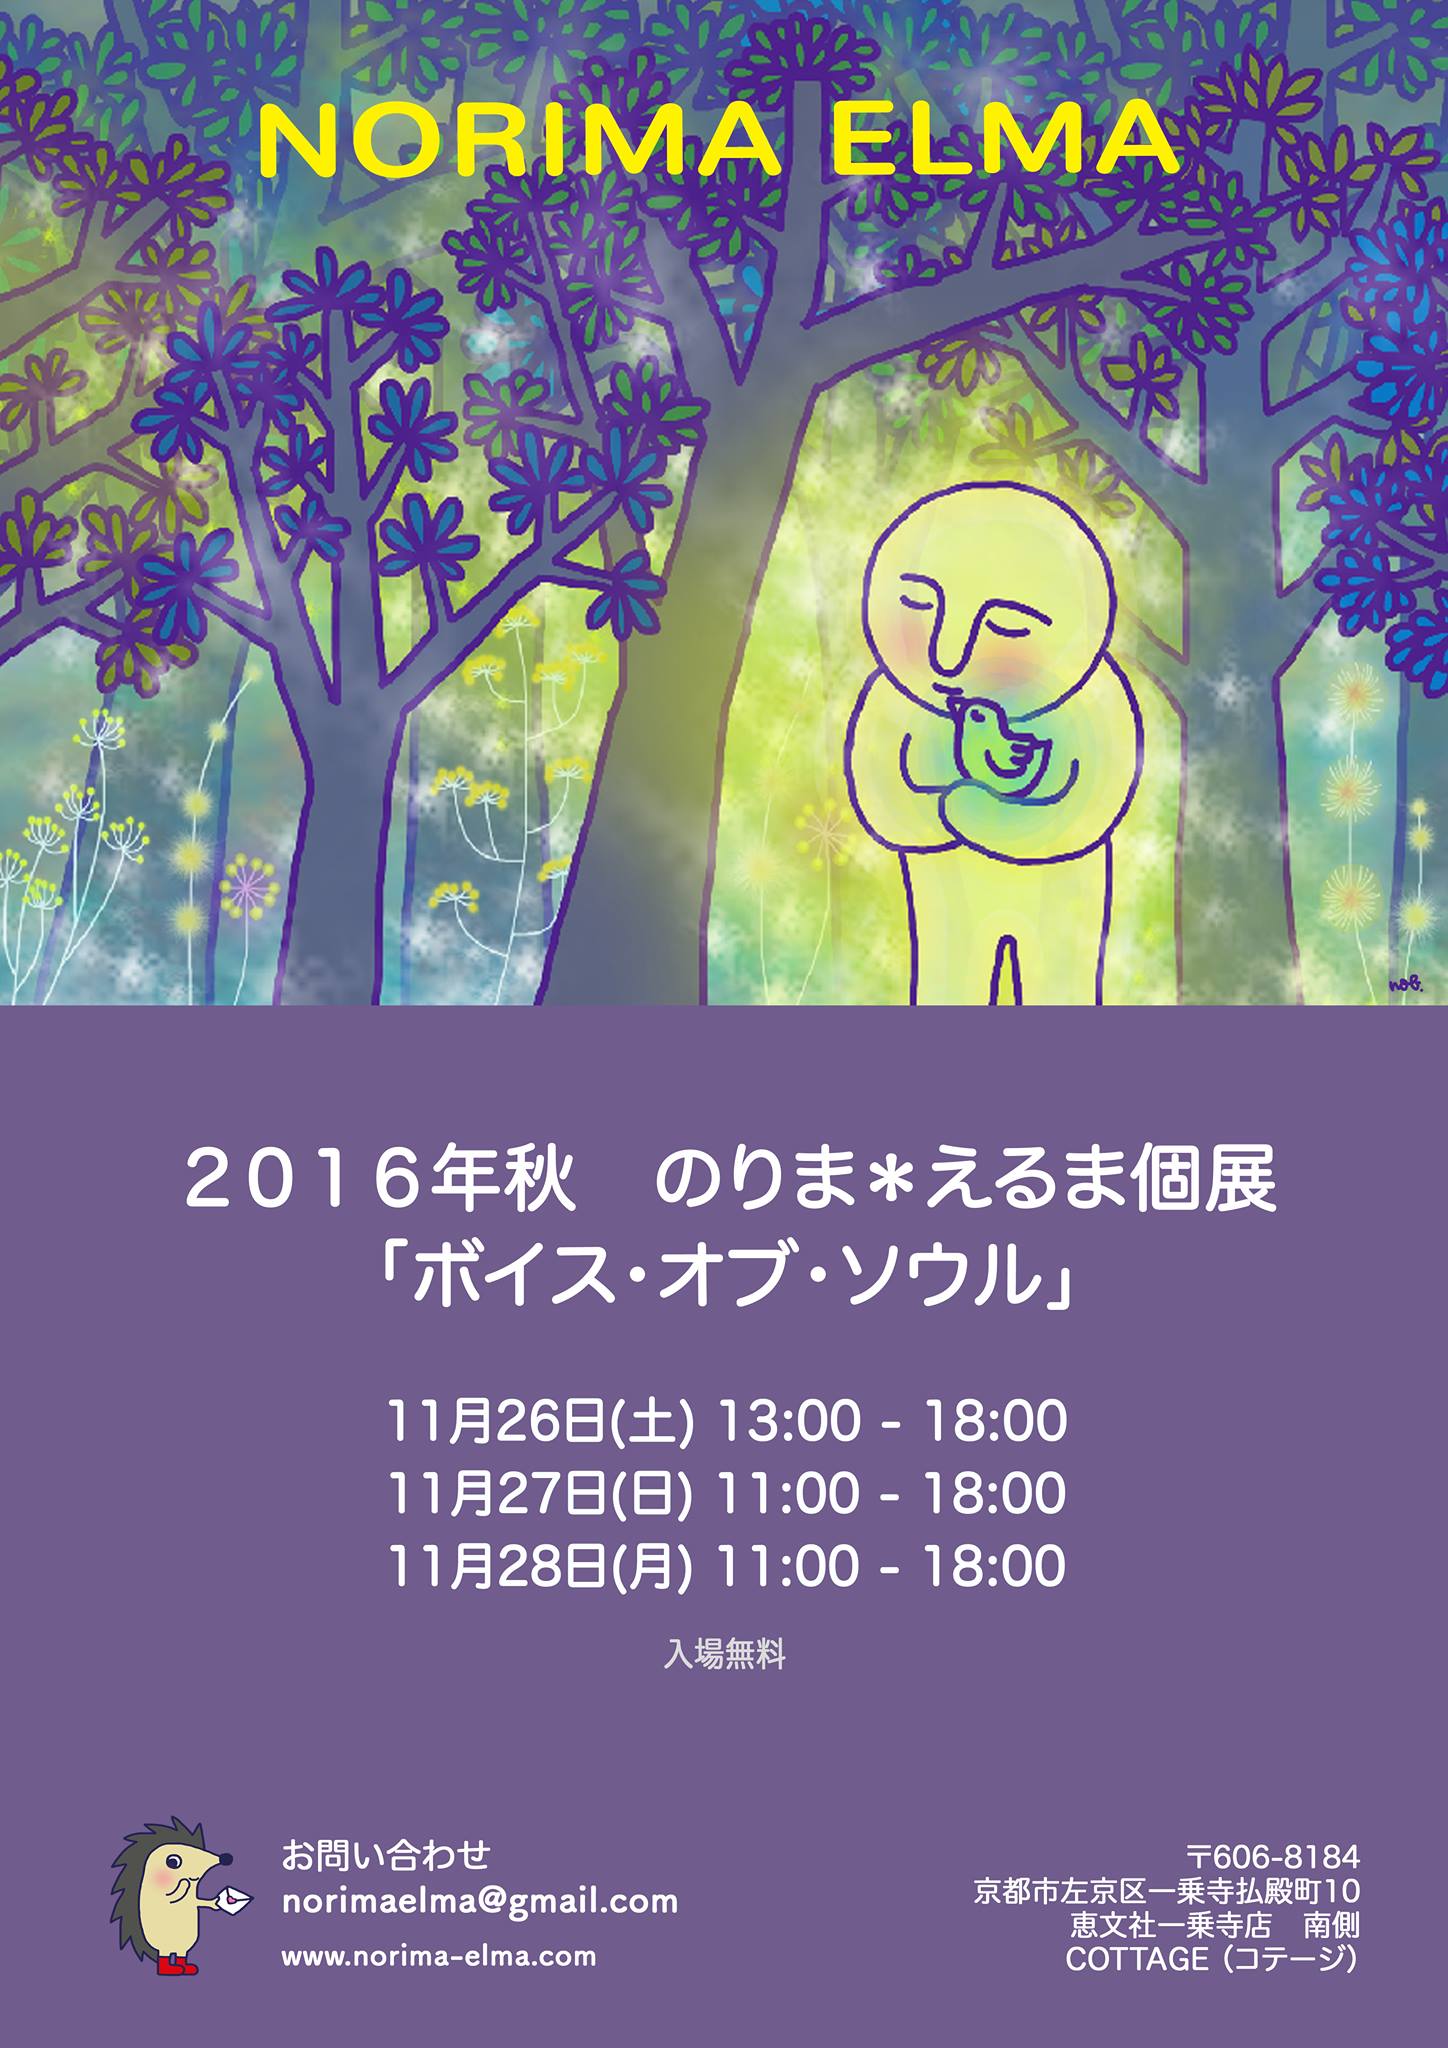 Exhibition 11-2016 in Japan